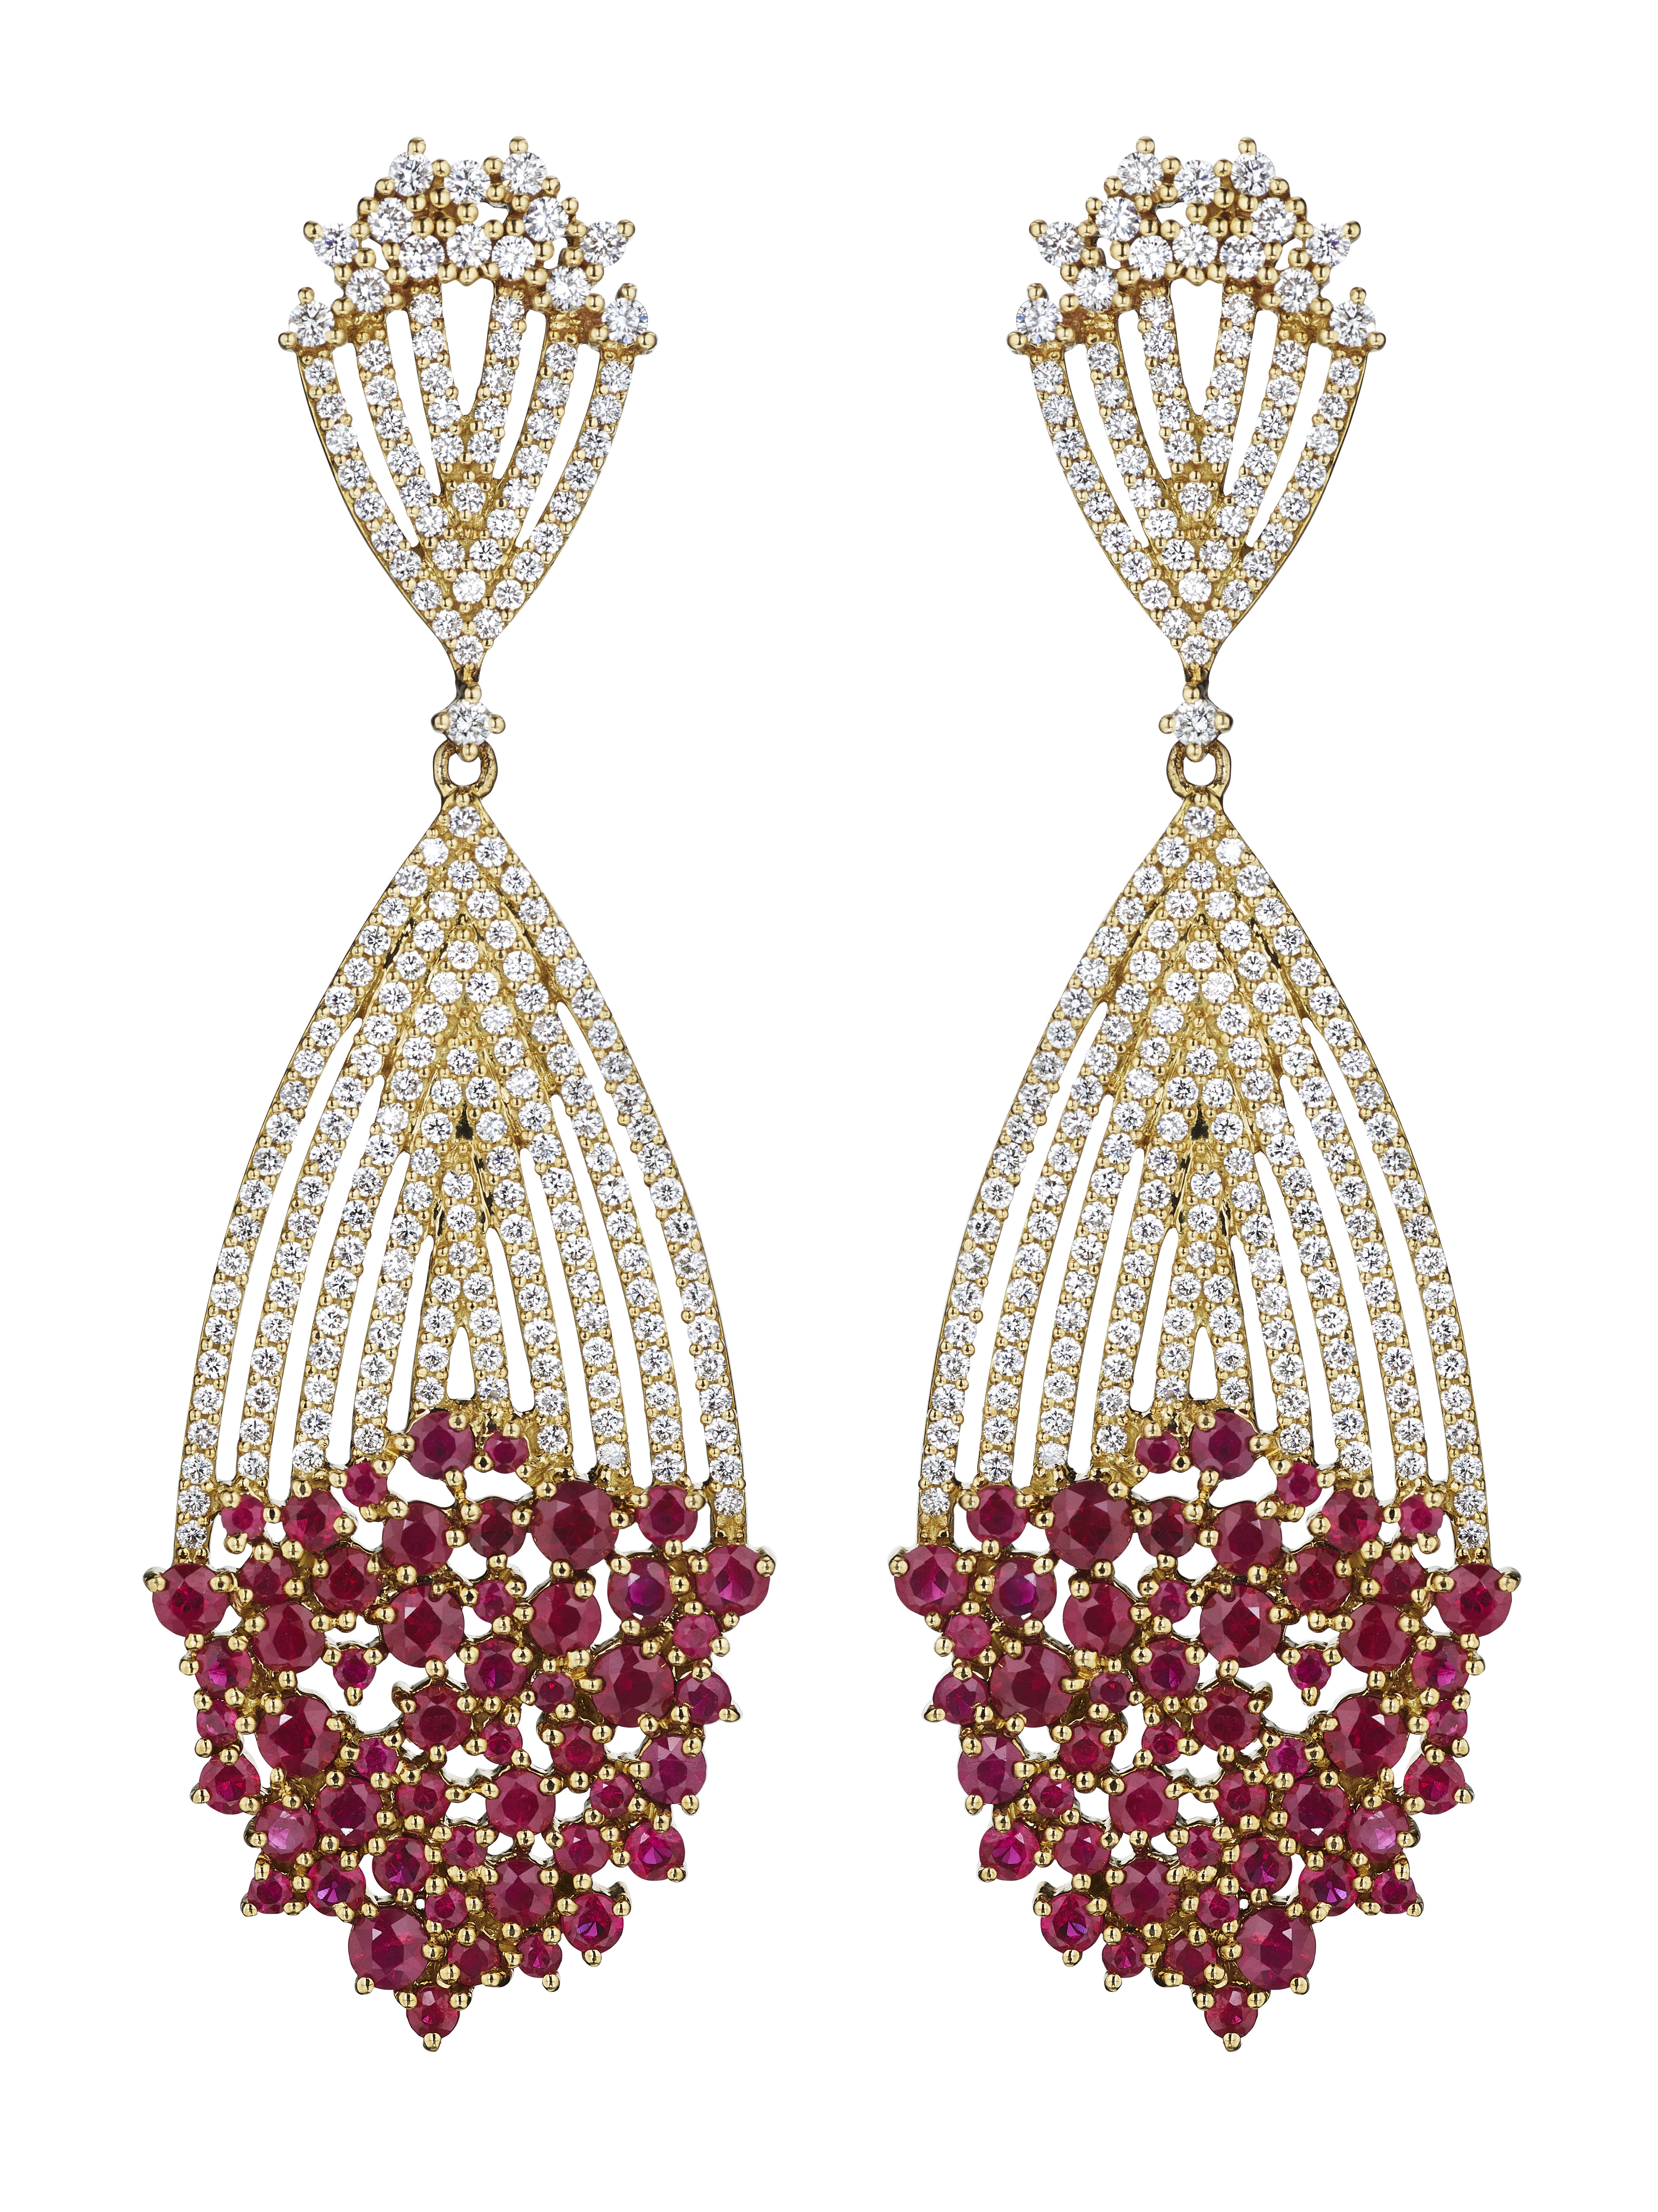 18 Karat Apus Yellow Gold Earring With Vs-Gh Diamonds And Red Ruby